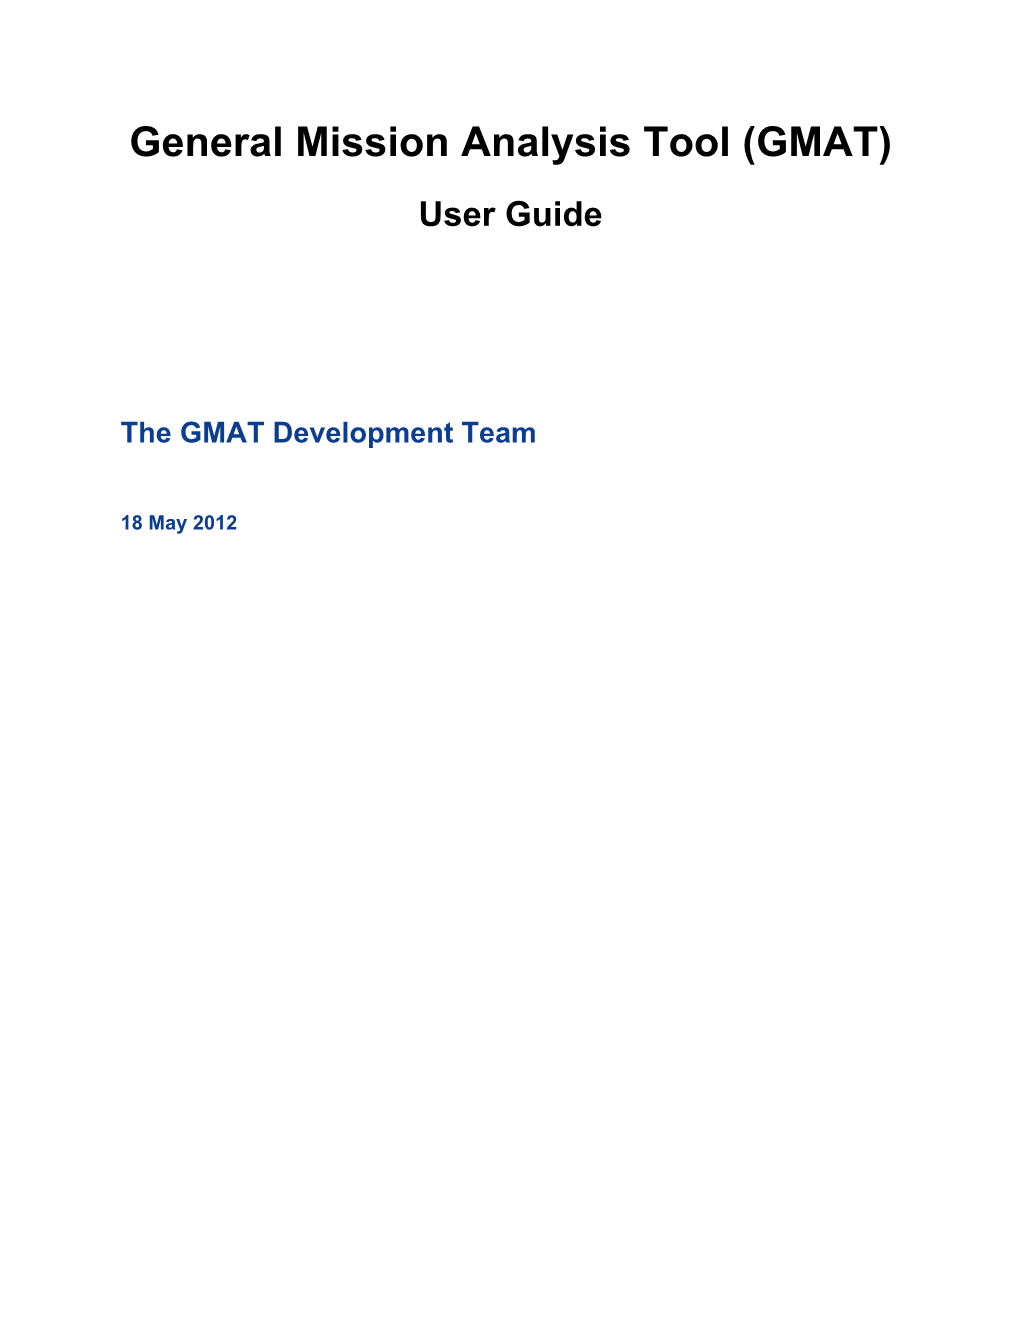 General Mission Analysis Tool (GMAT) User Guide